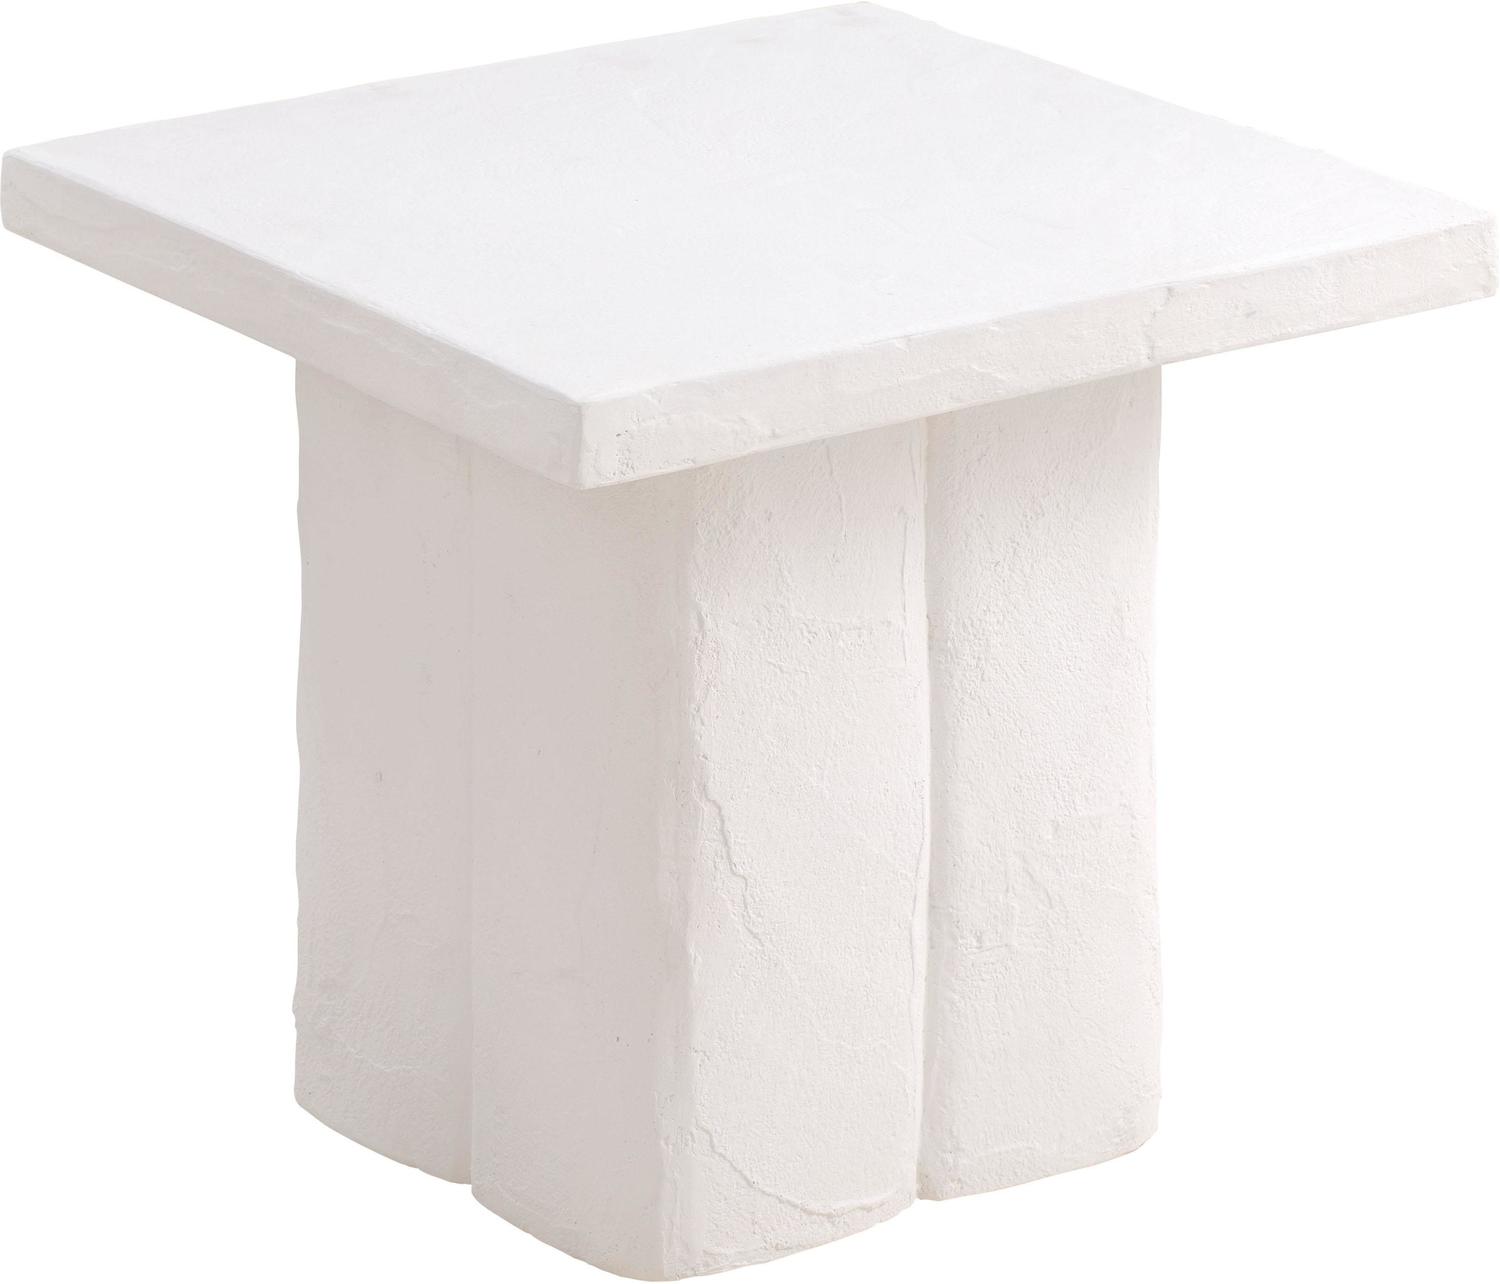 small nesting tables Contemporary Design Furniture Side Tables White